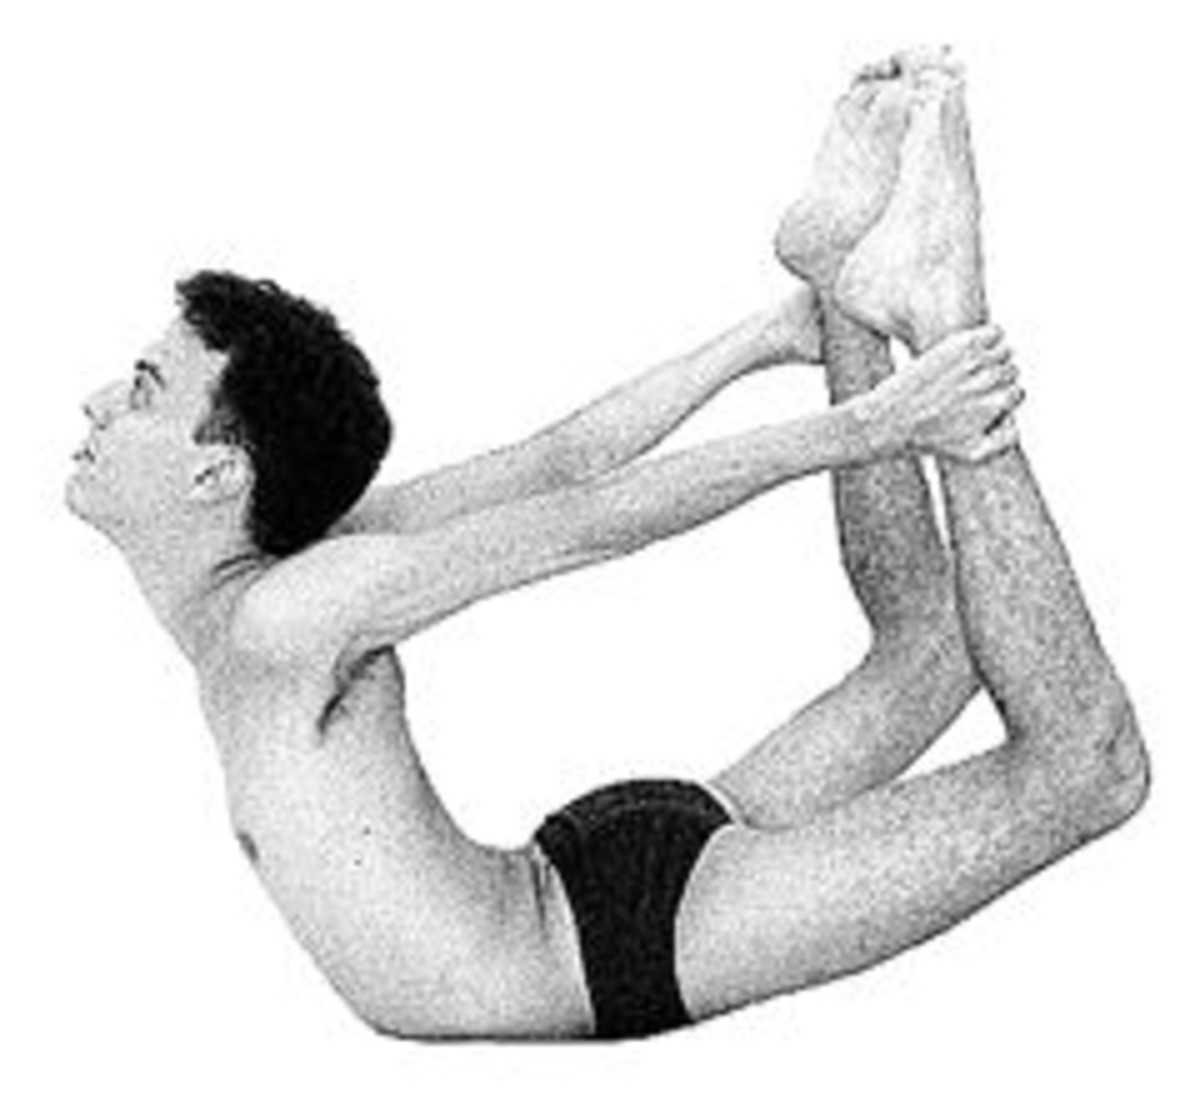 Dhanurasana or Bow Pose, is an advanced pose for strengthening the shoulders and the spine.